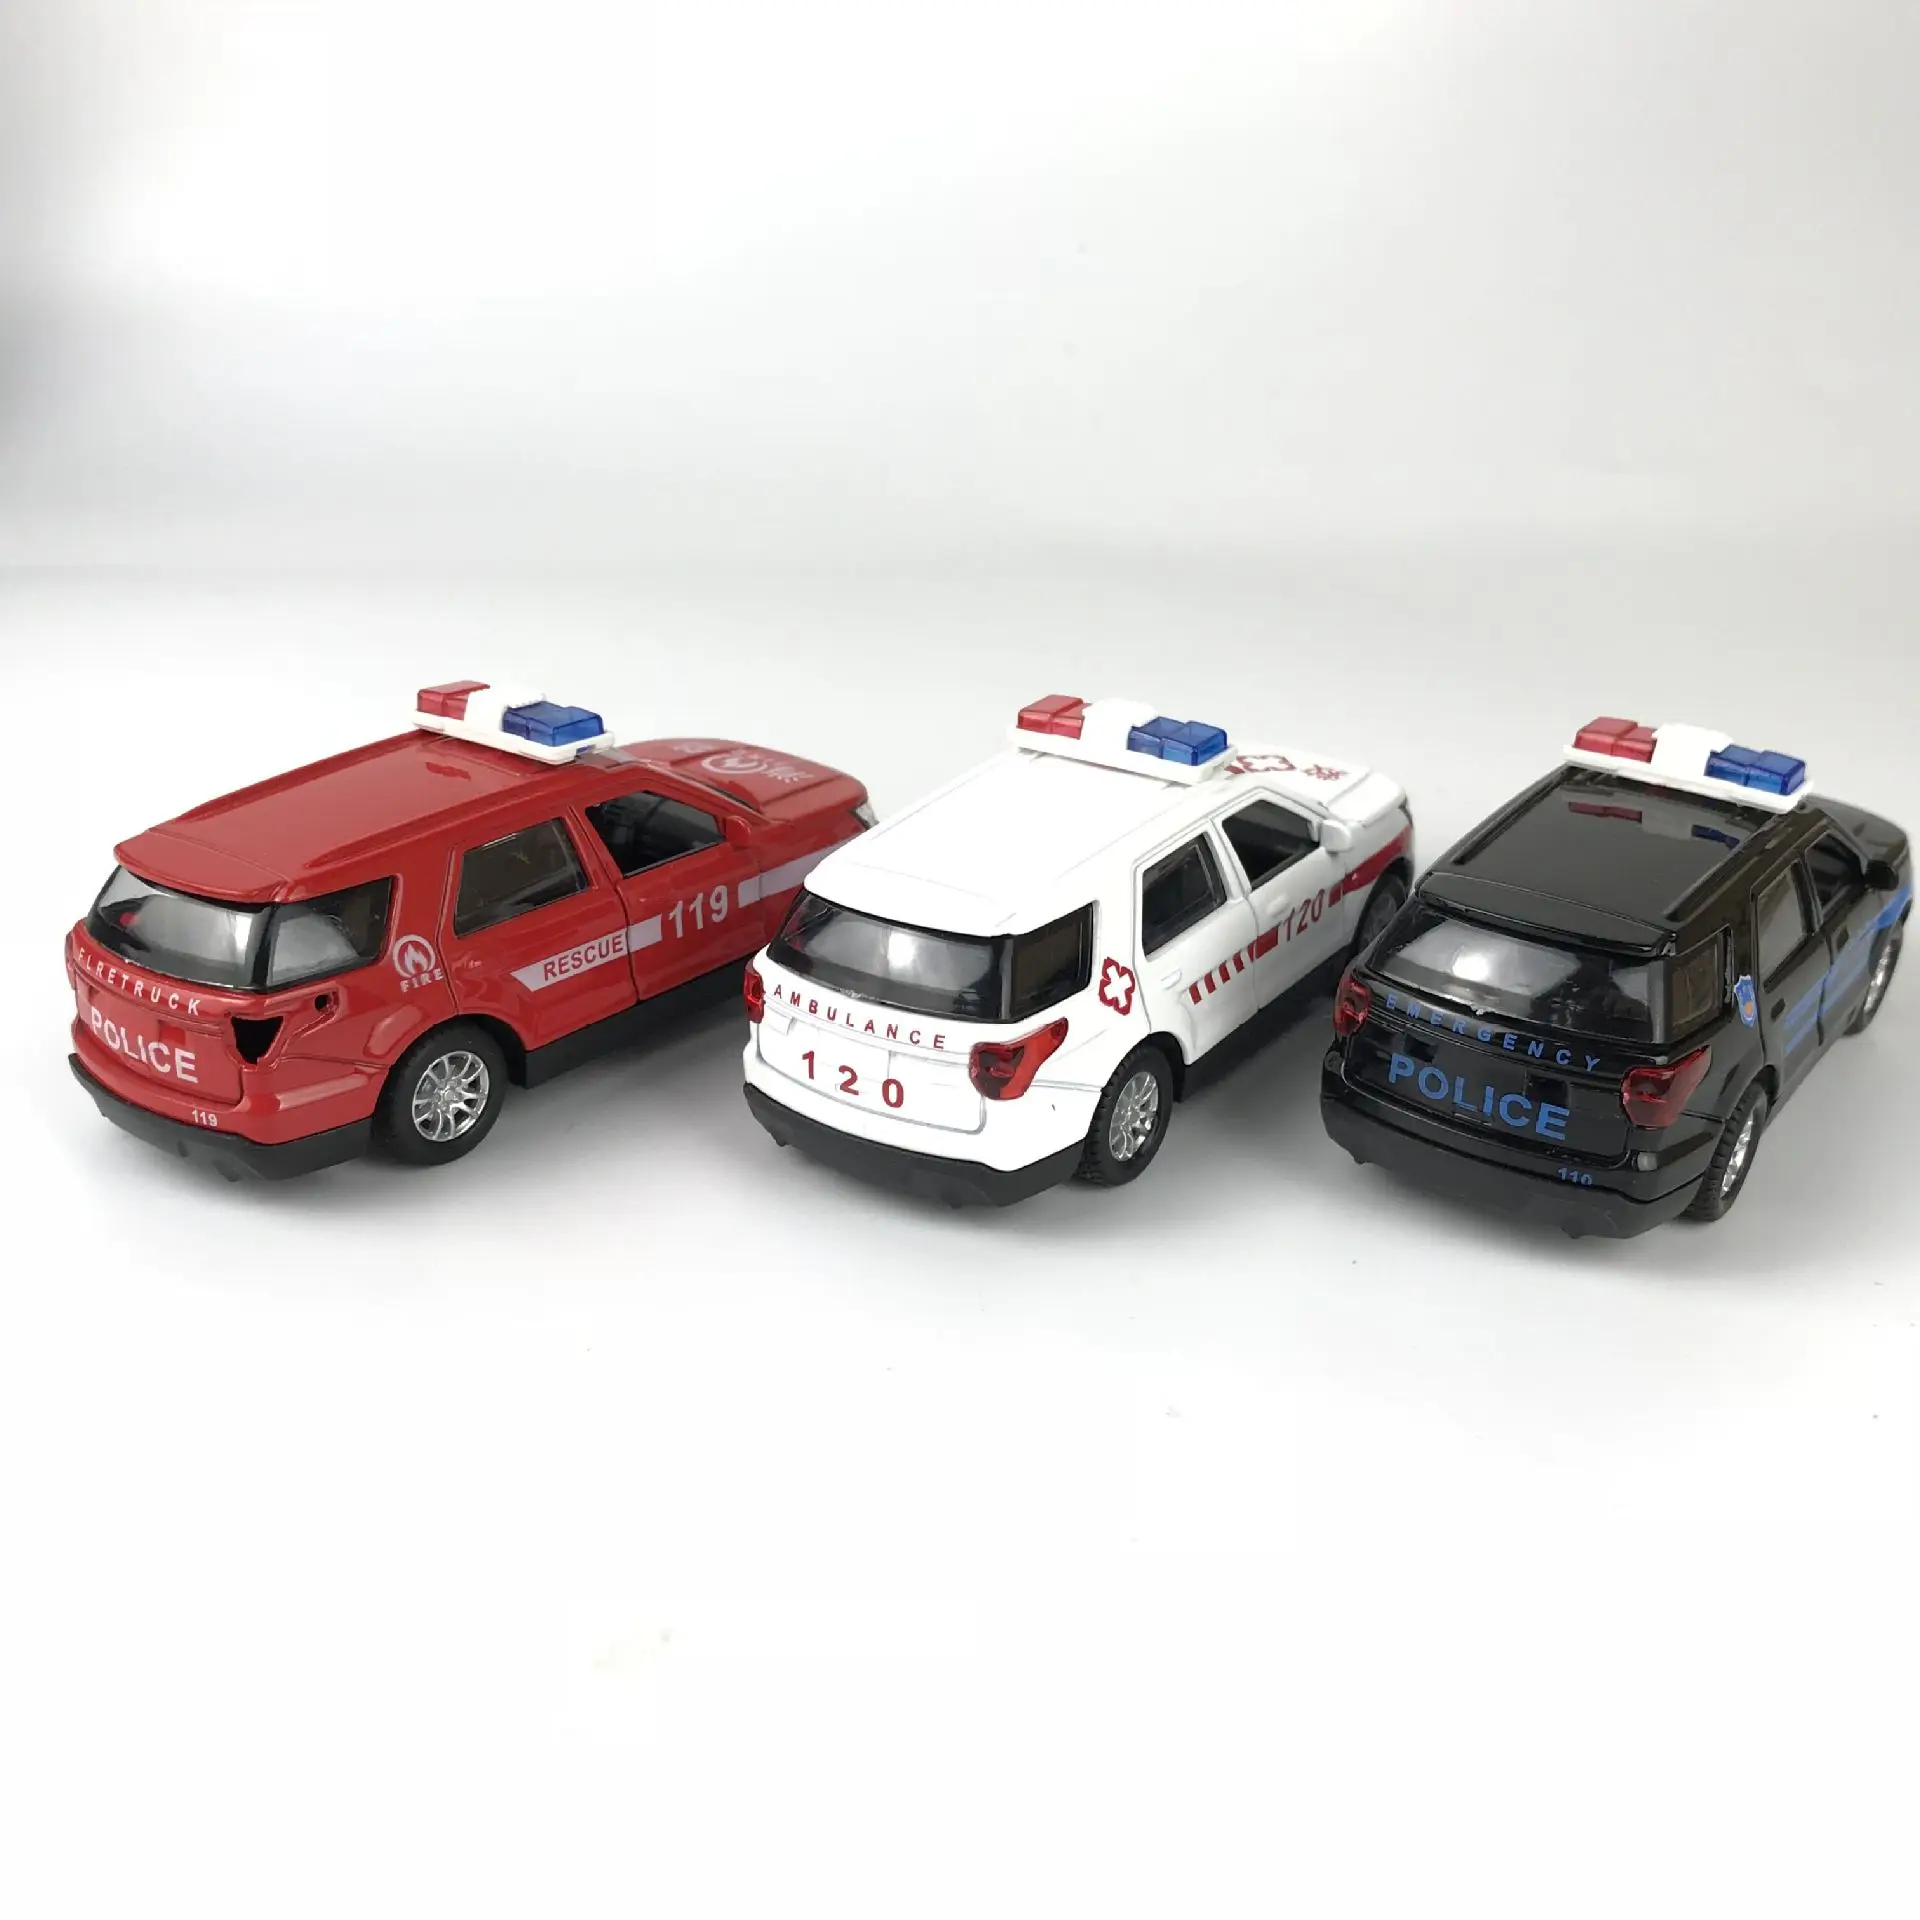 

1:32 Hospital Rescue Ambulance Police Fire Truck Metal Car Model with Pull Back Sound Light Kid Student Toys Boys Festival Gift